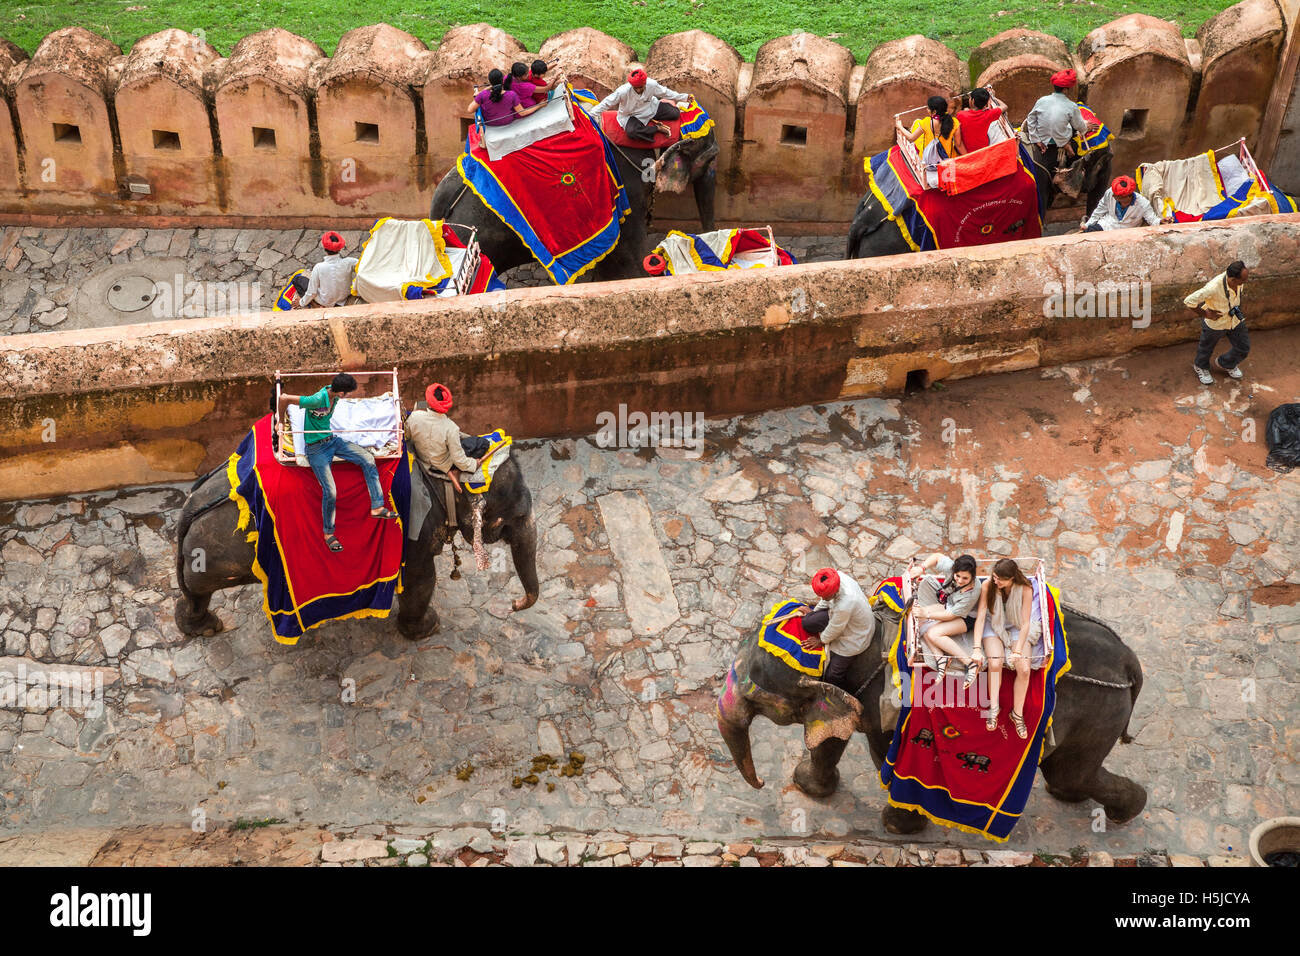 Tourists riding elephants in Amer Fort, Rajasthan, India. Stock Photo